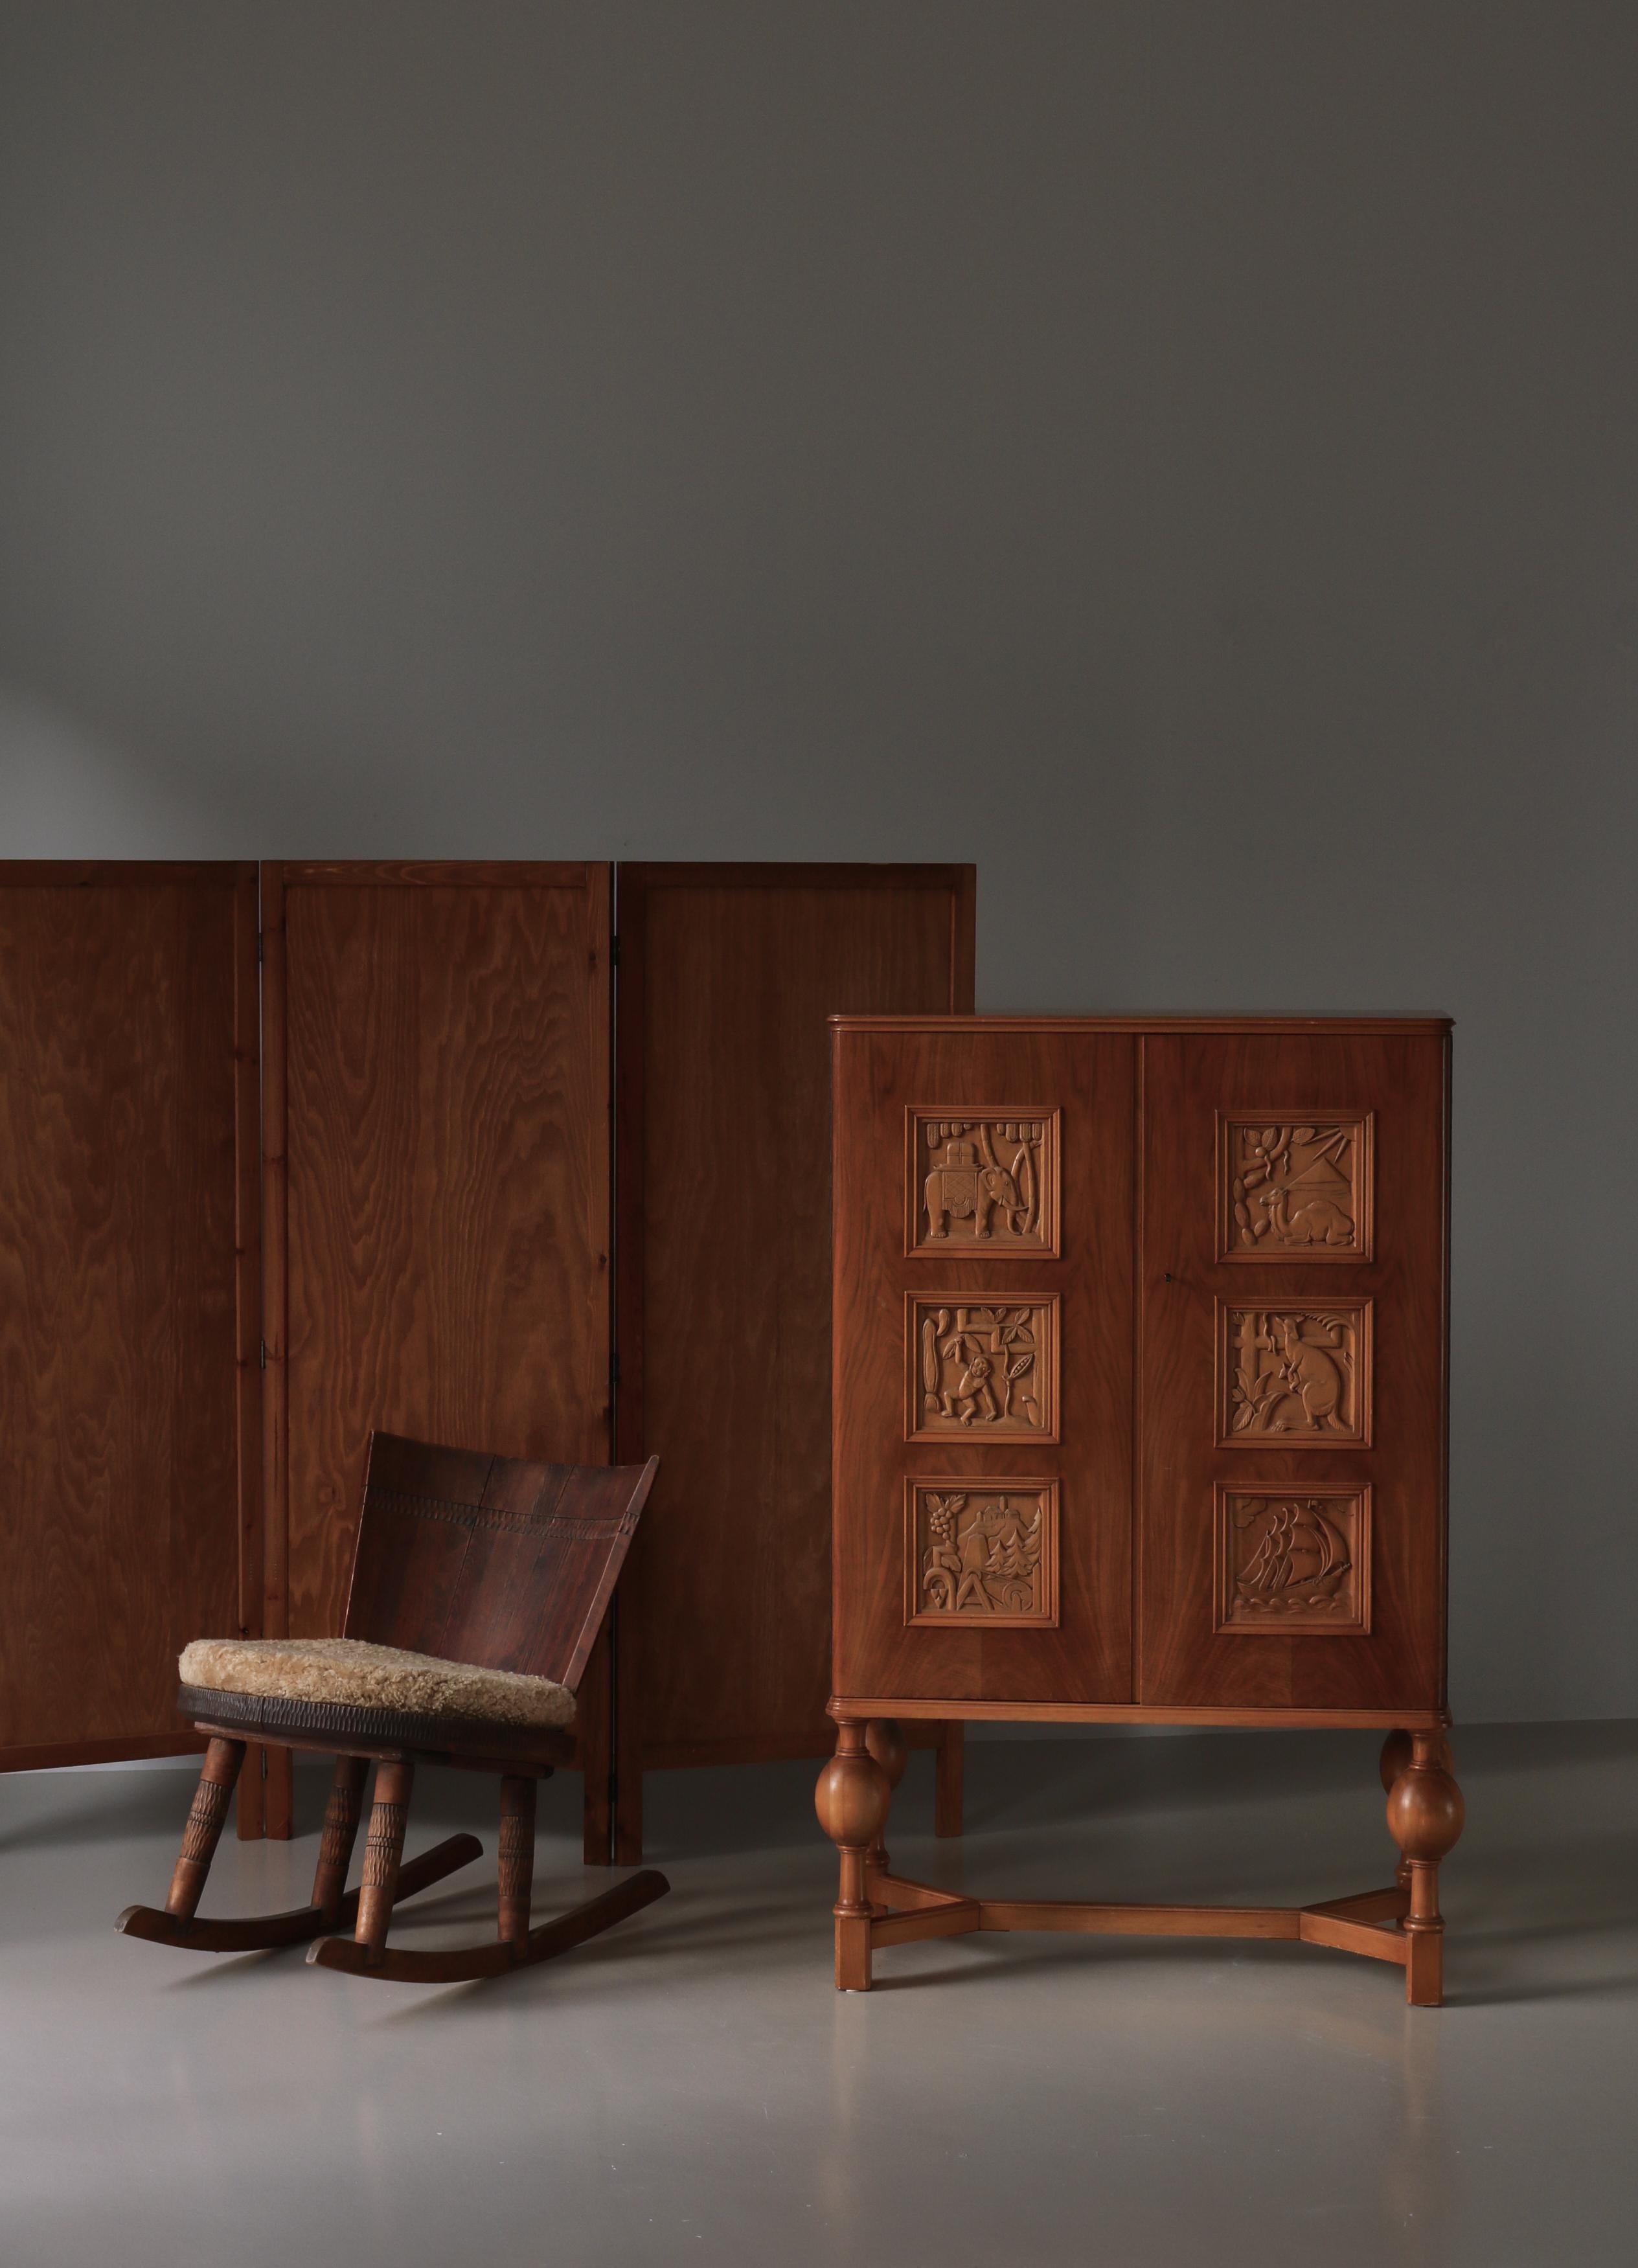 Beautiful Swedish Grace cabinet by Swedish designer Eugen Höglund with 6 wonderful hand carved panels depicting various animals and landscapes in fruitwood and beech. The cabinet has two interior shelves and two stationery pull out drawers. The